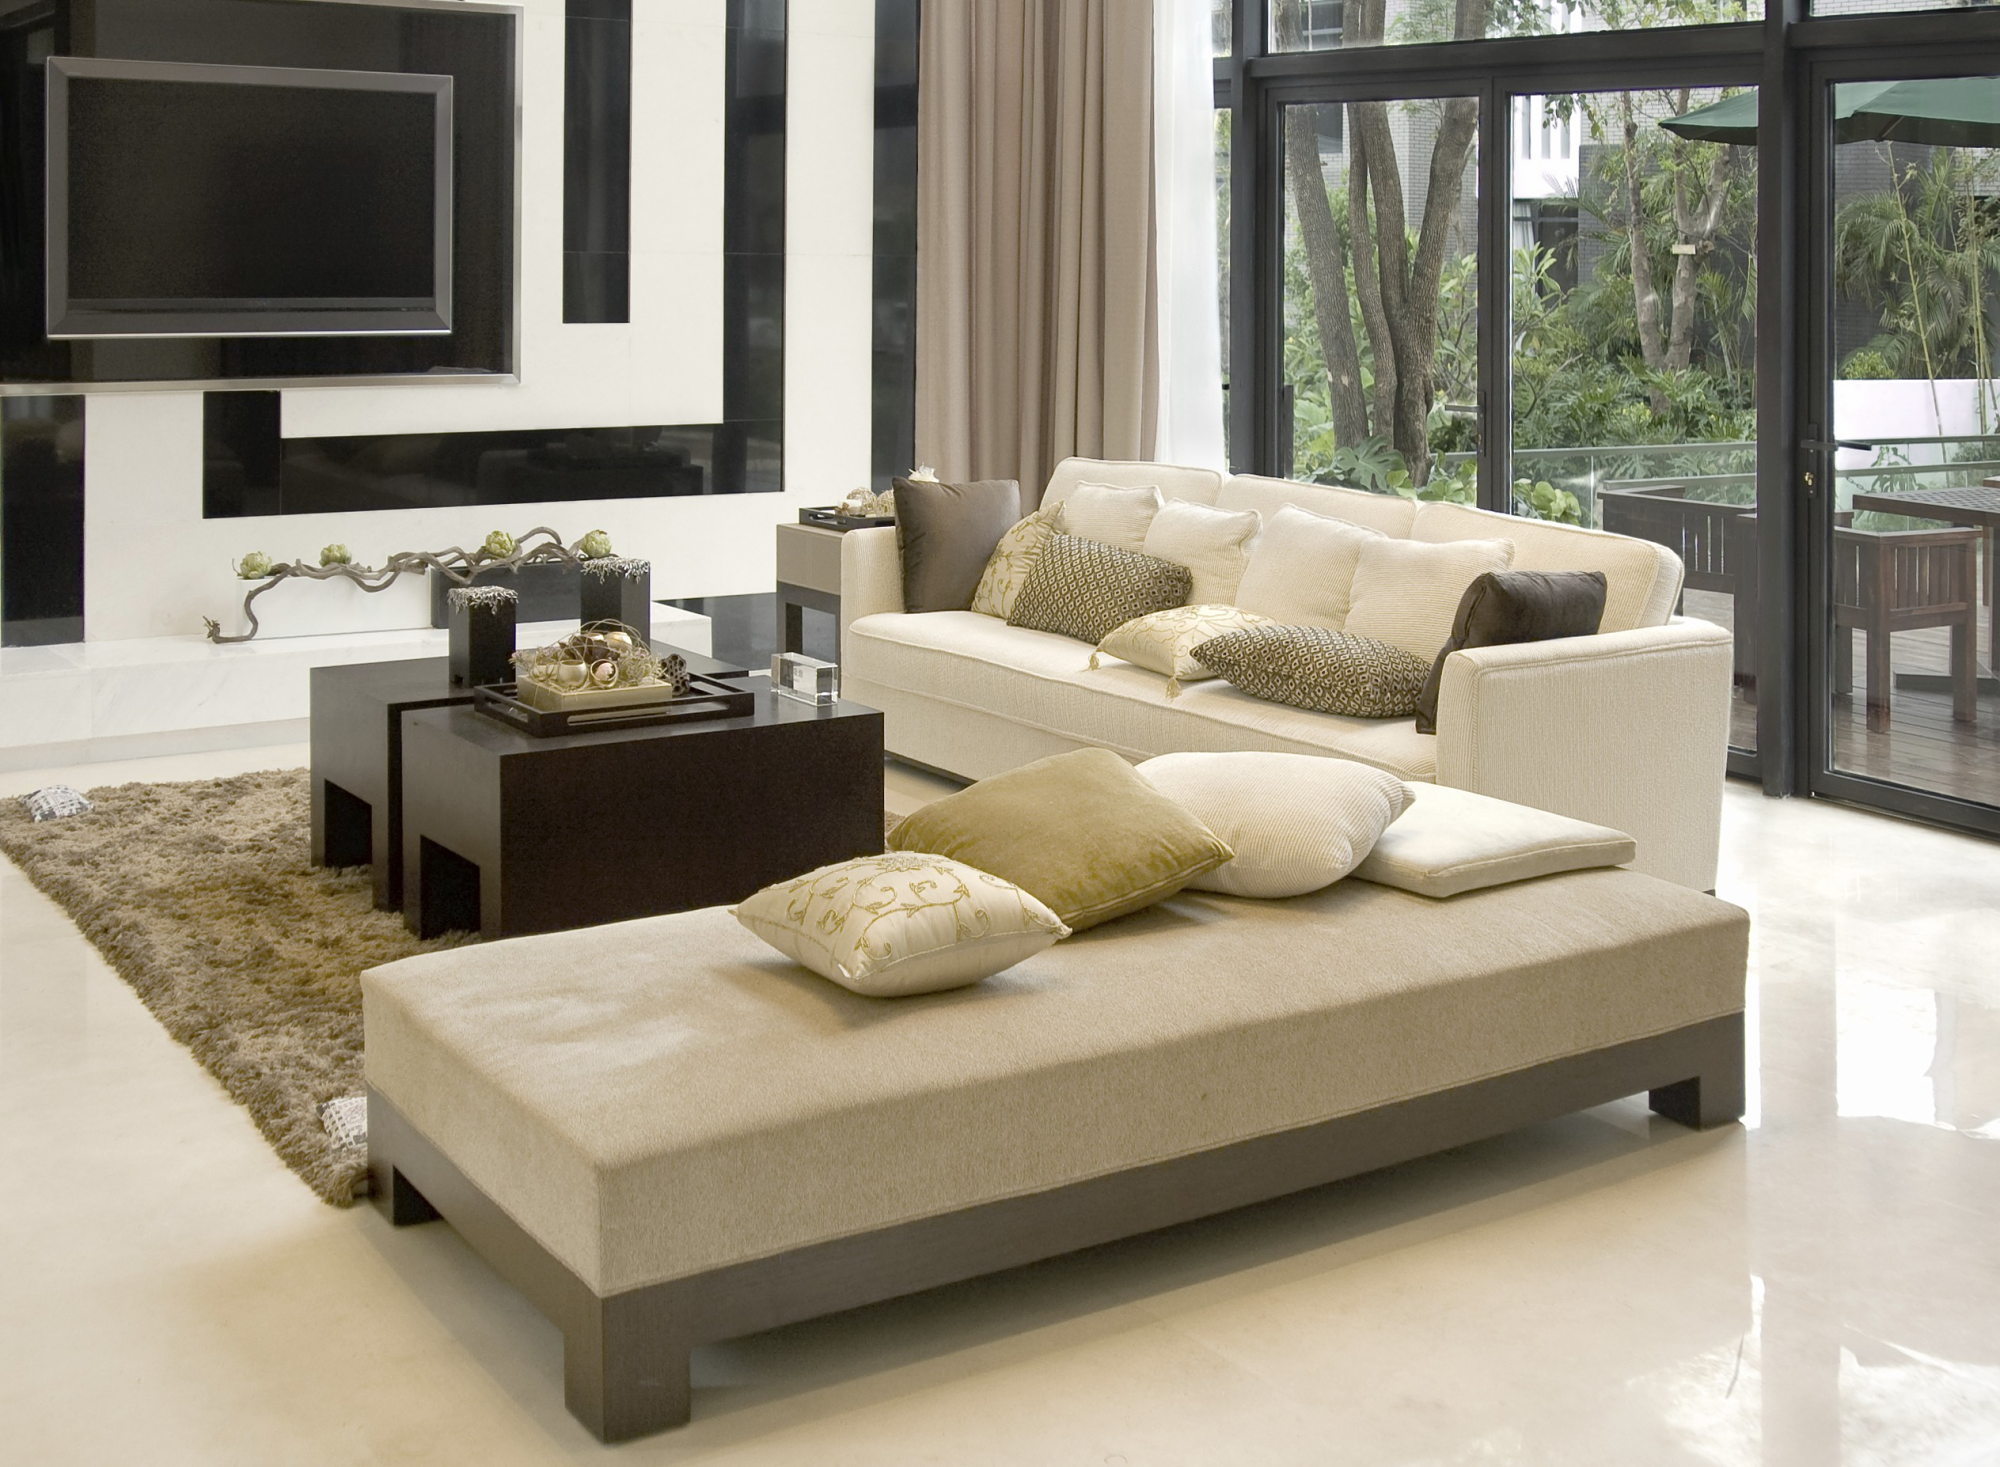 Beige Color In The Interior And Its Combinations With Other Colors,Modern Grey Paint Colors For Living Room